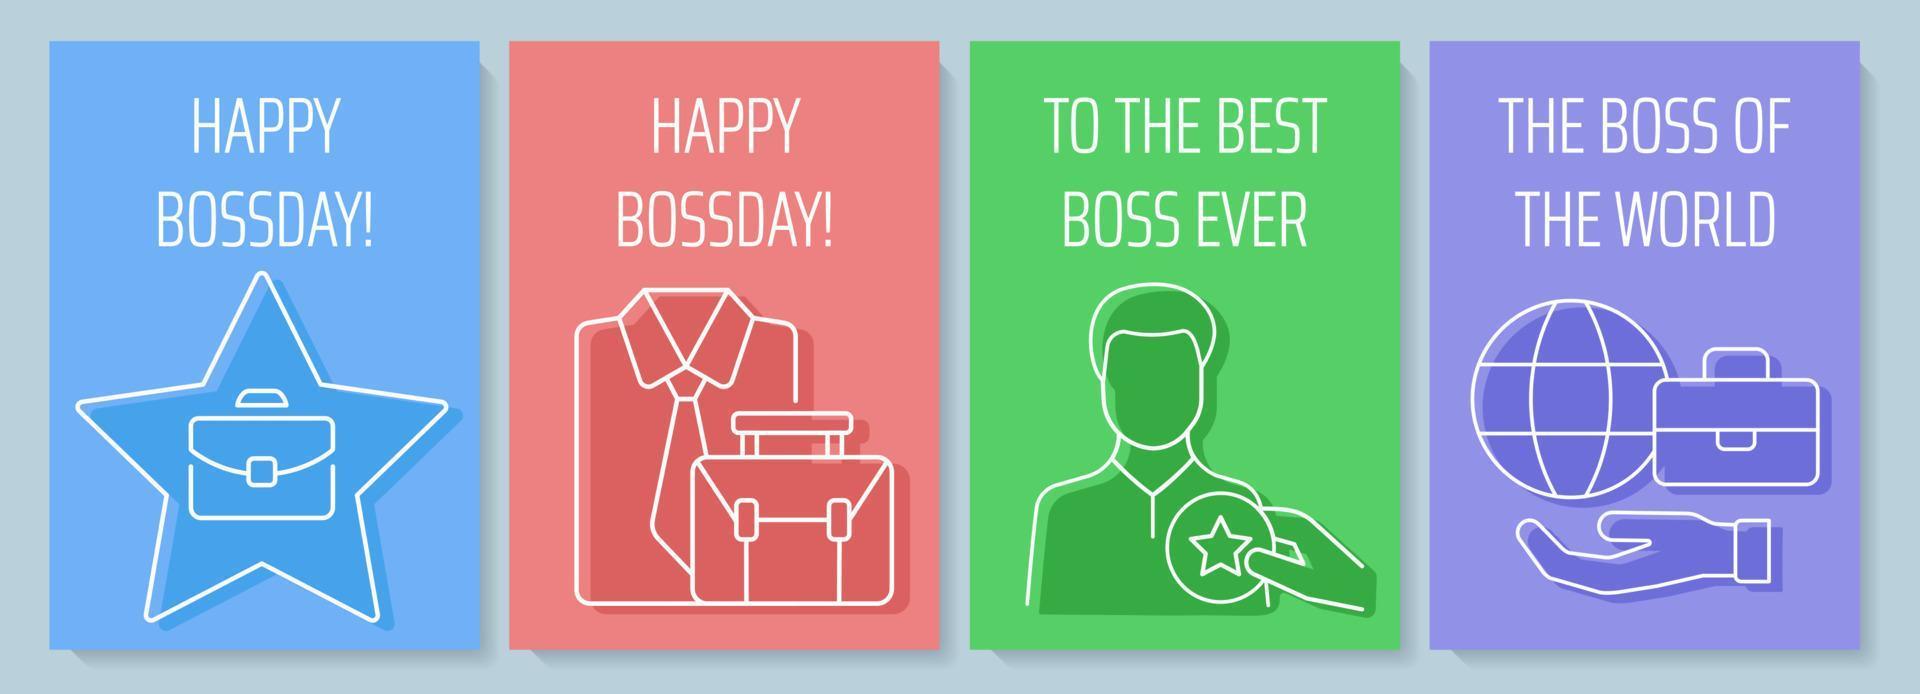 Boss postcard with linear glyph icon set. Congratulate director and ceo. Greeting card with decorative vector design. Simple style poster with creative lineart illustration. Flyer with holiday wish